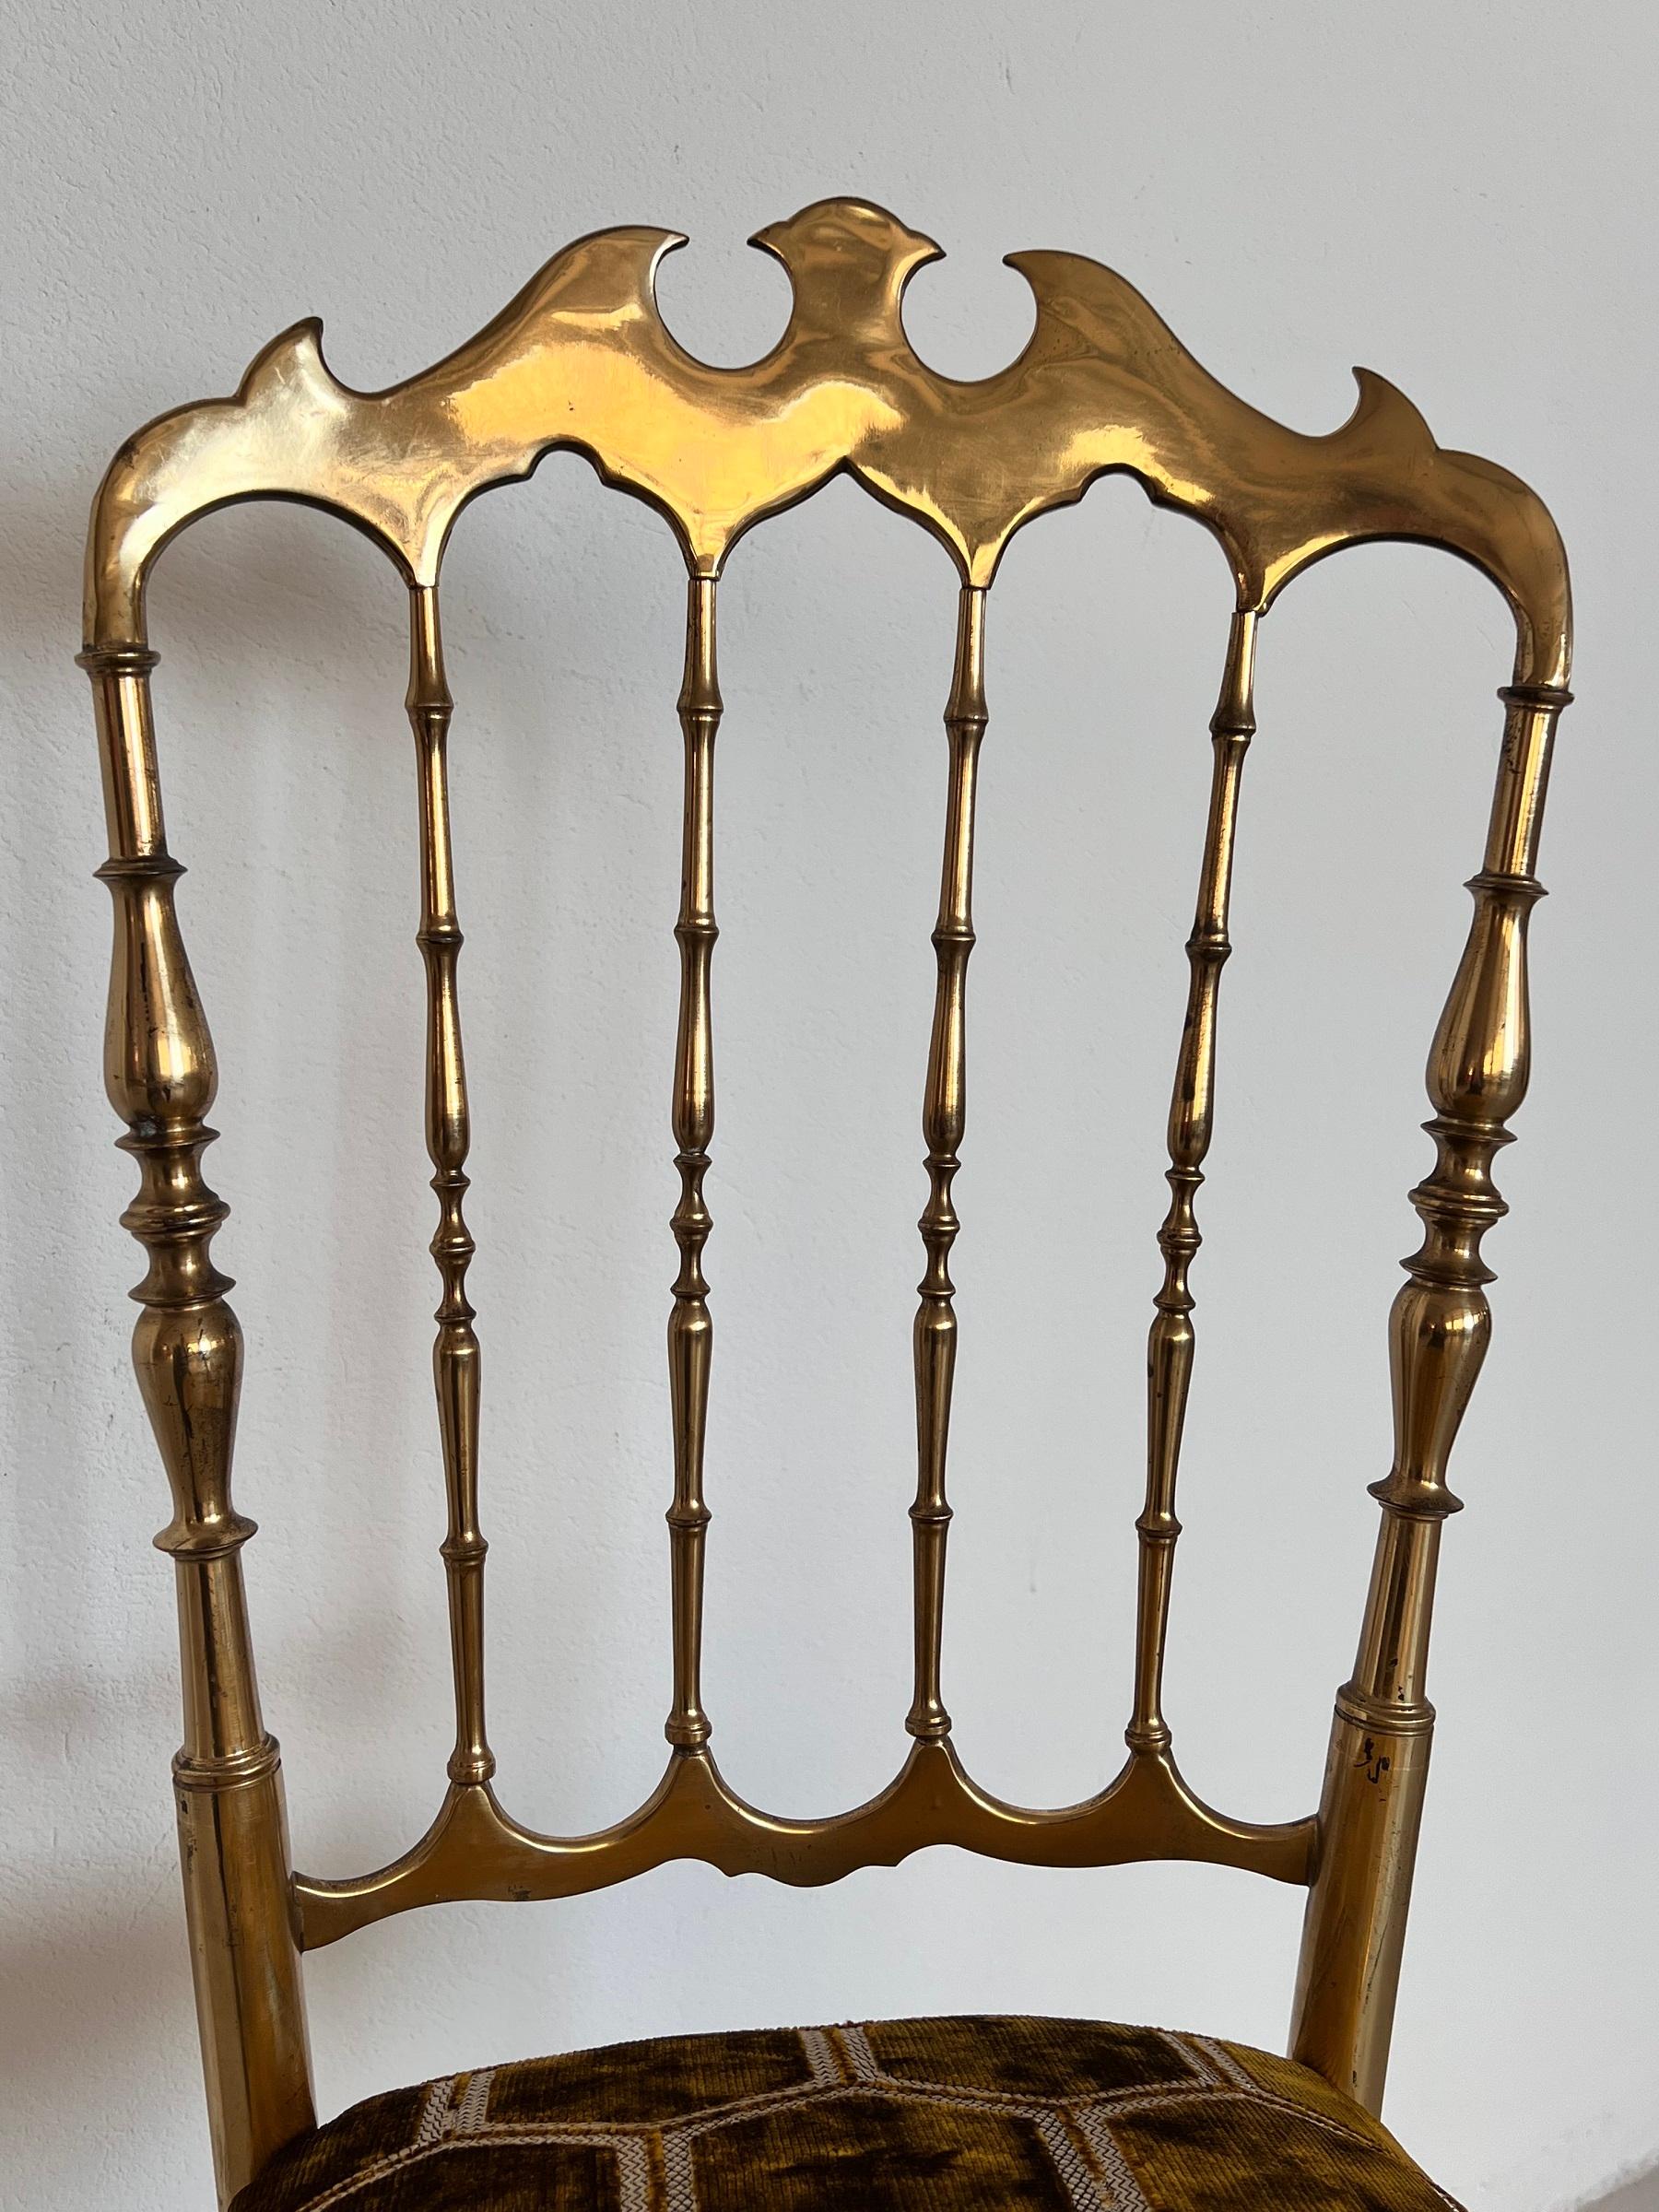 Italian Mid-Century Chiavari Chair in Full Brass with New Upholstery, 1970s For Sale 7